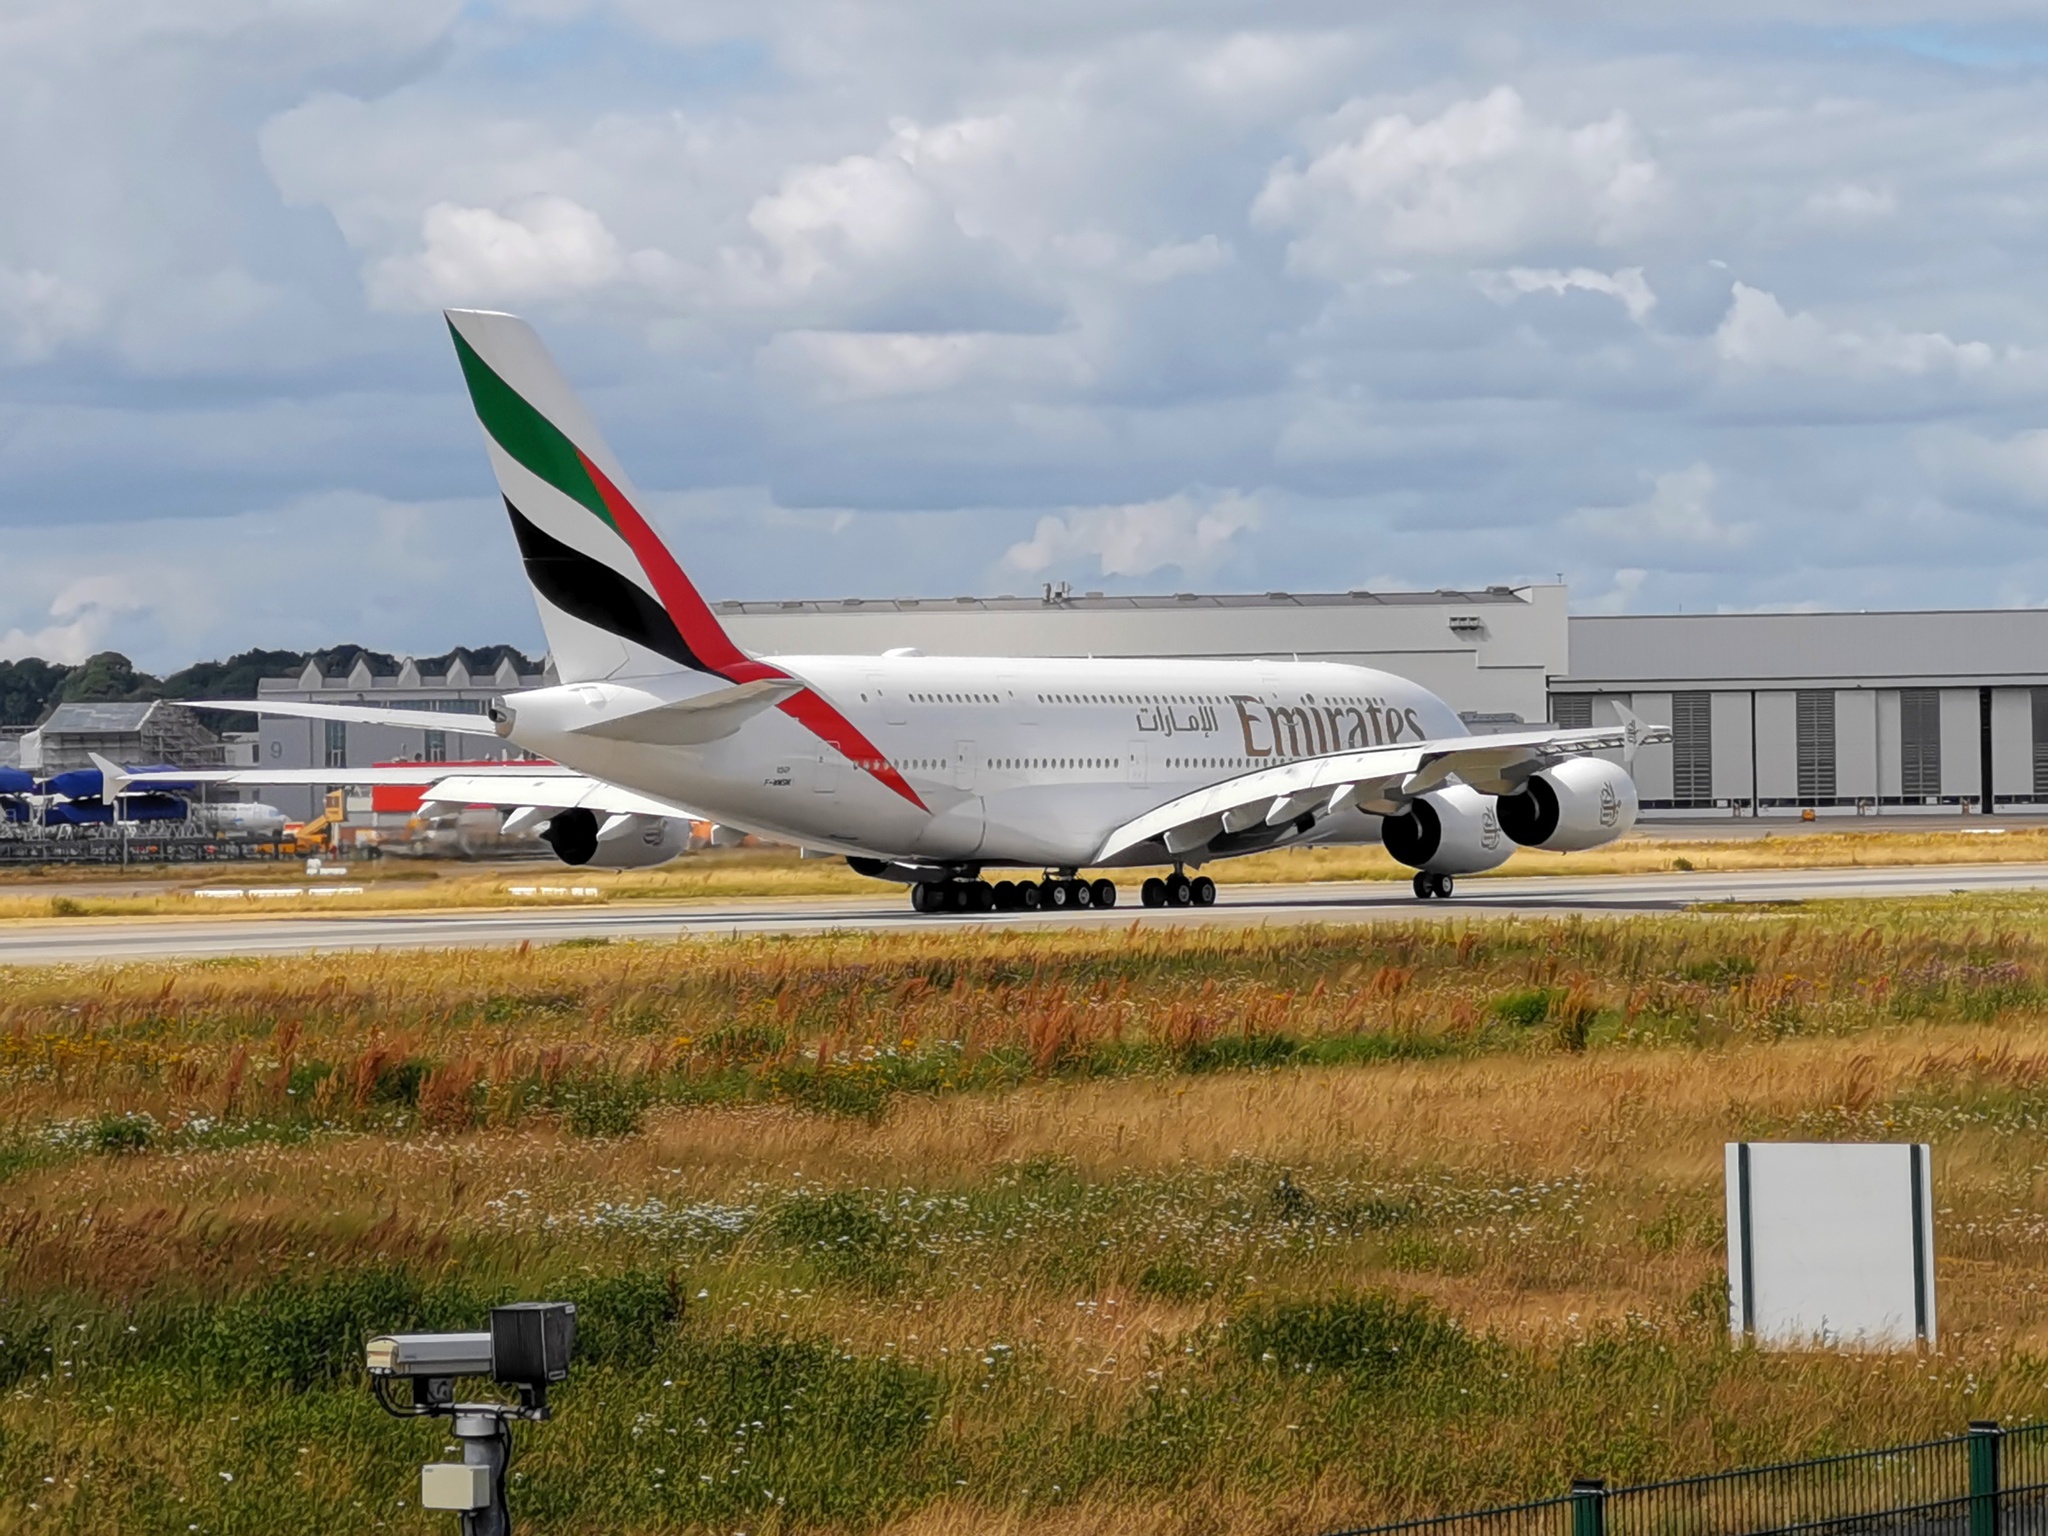 Airbus A380. Photos from the airfield. July 3, 2019 - My, Hamburg, Rammstein Deutschland, Germany, Aviation, Airbus, Airbus A380, Takeoff, Airplane, Video, Longpost